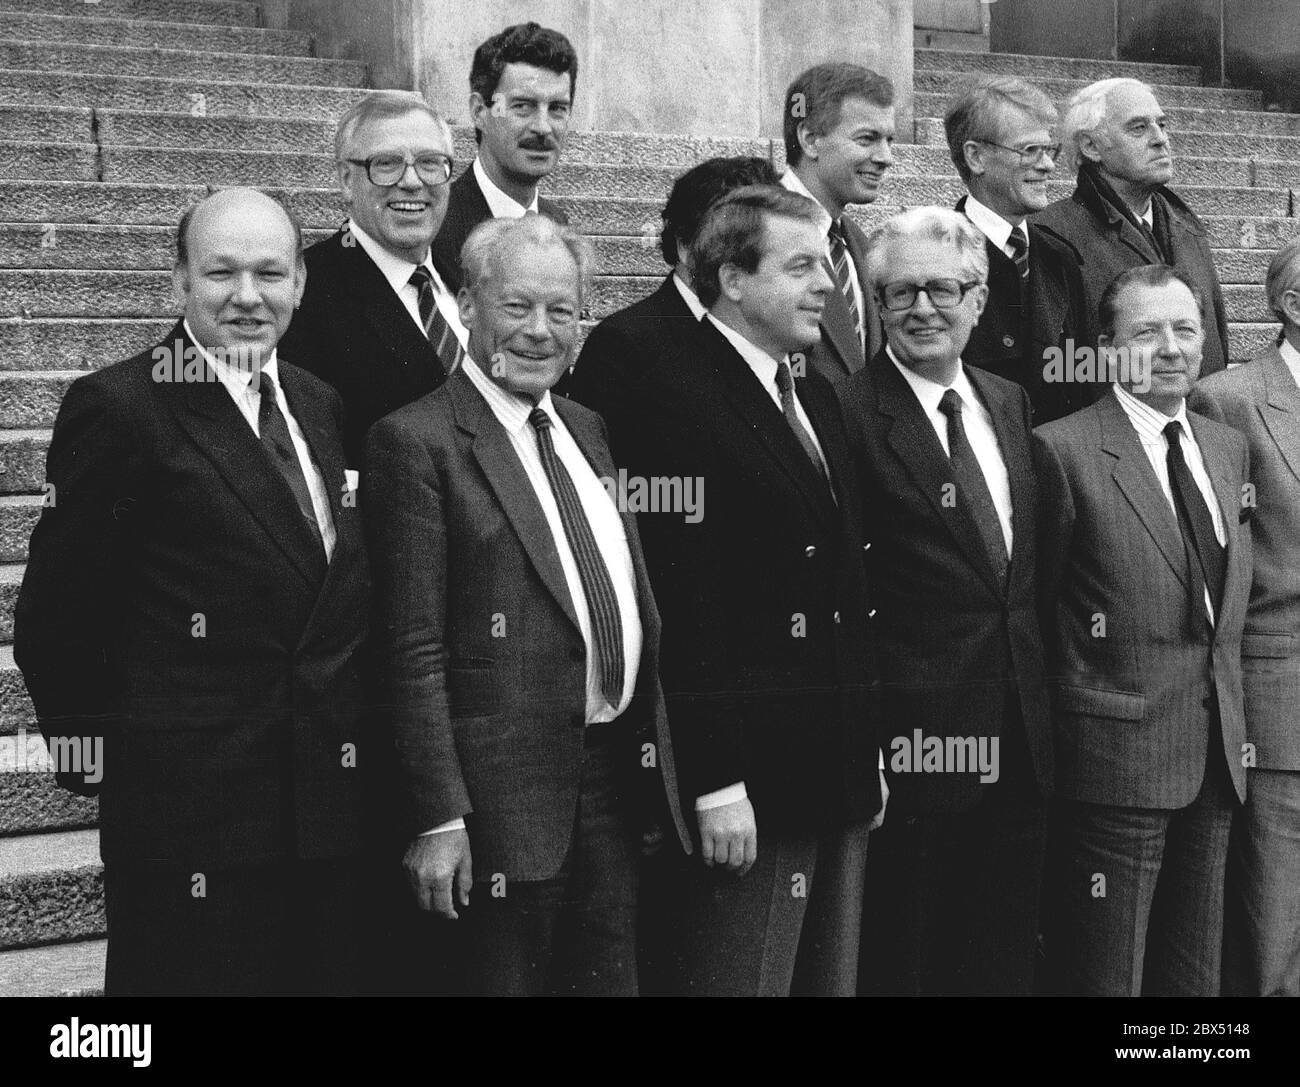 Berlin / 80s / 6 November 1988 Berlin, Reichstag: the Prime Ministers of the EC / EFTA meet: with Walter Momper, Willy Brandt, Jochen Vogel, Jaques Delors, Ingvar Carlsson, Franz Vranitzky and others *** Local Caption *** Europe / Members of the EFTA / EC meeting in Berlin Reichstag [automated translation] Stock Photo